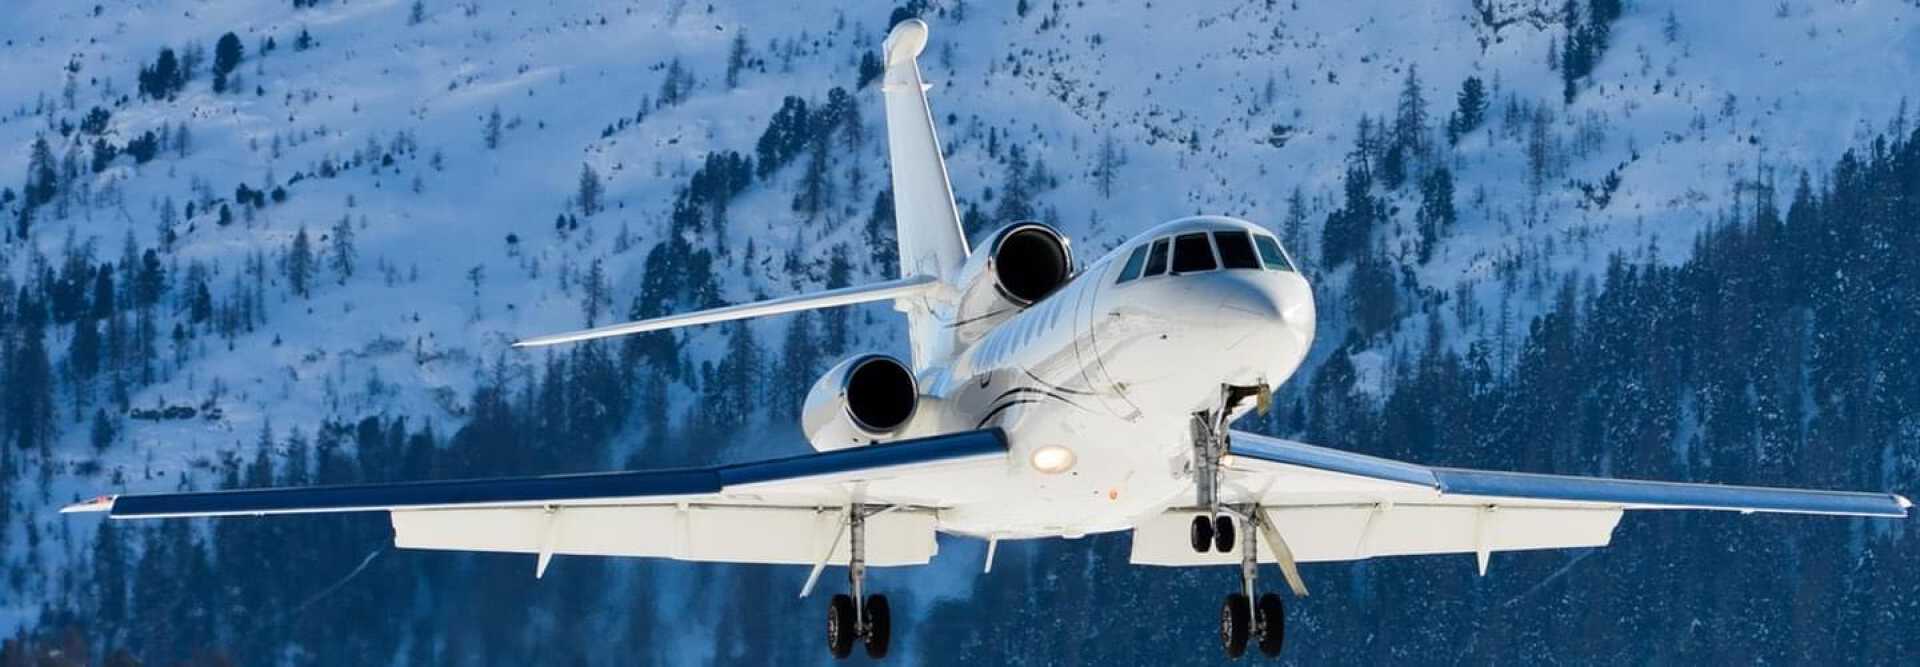 Midsize Jet Dassault Falcon 50EX to charter for private aviation flights with LunaJets, stylish corporate aircraft for medium-haul flights